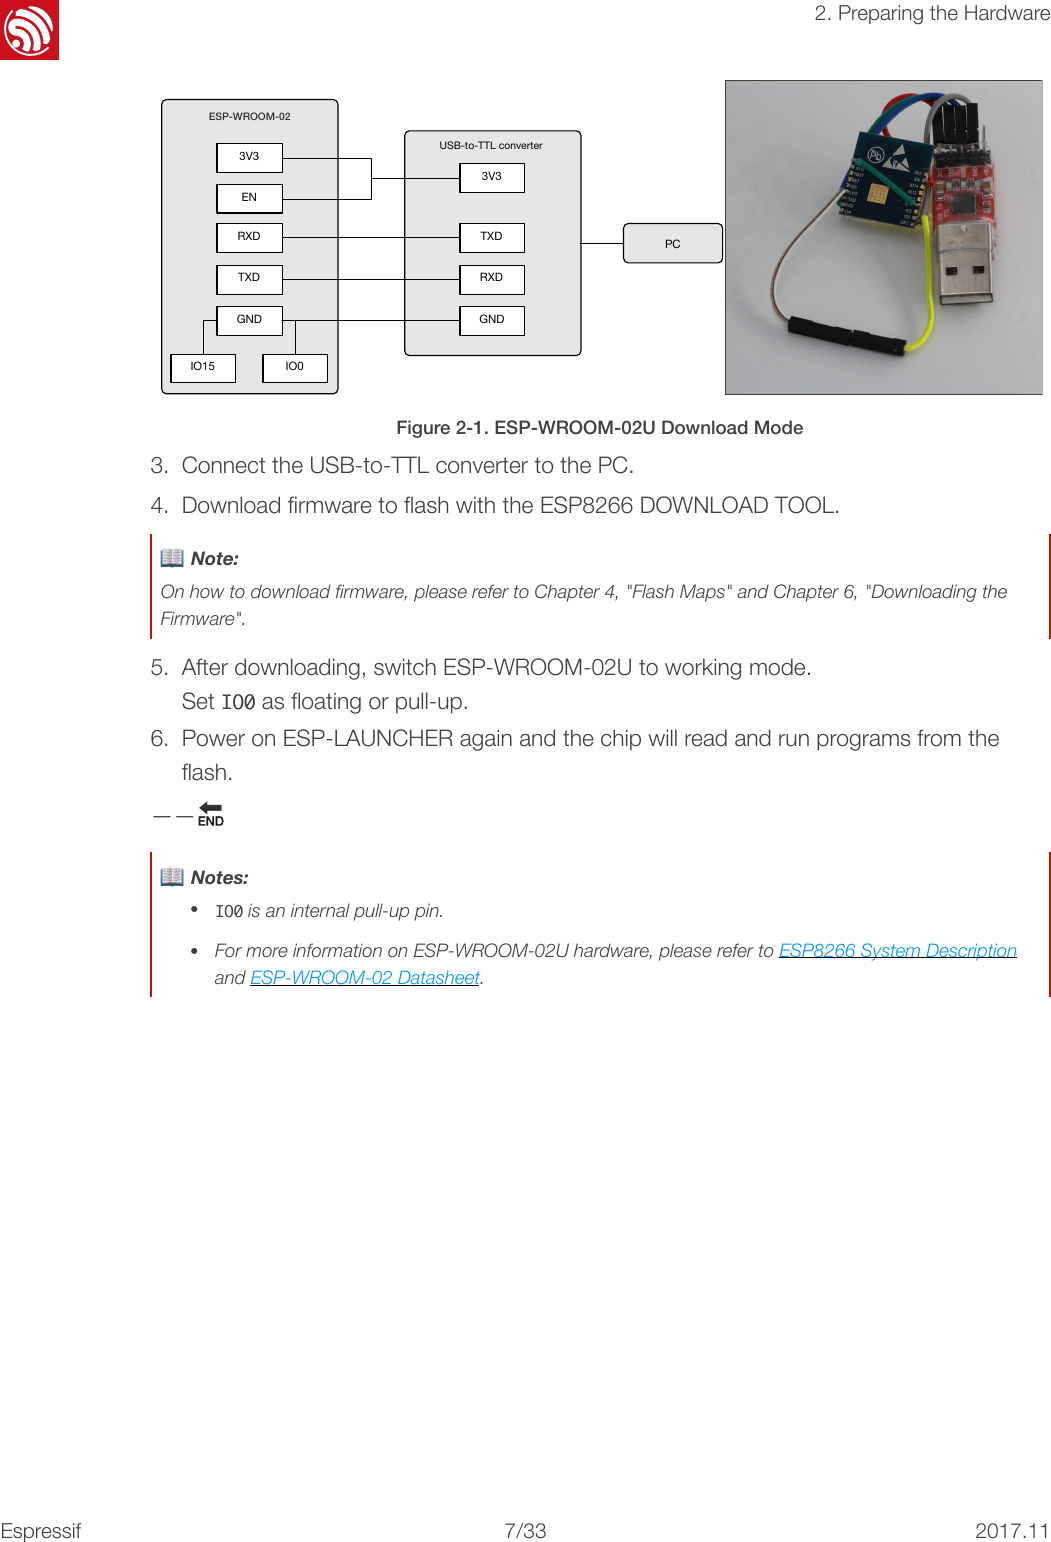 !2. Preparing the Hardware! !  Figure 2-1. ESP-WROOM-02U Download Mode 3. Connect the USB-to-TTL converter to the PC. 4. Download ﬁrmware to ﬂash with the ESP8266 DOWNLOAD TOOL. 5. After downloading, switch ESP-WROOM-02U to working mode.&quot;Set IO0 as ﬂoating or pull-up. 6. Power on ESP-LAUNCHER again and the chip will read and run programs from the ﬂash. ——🔚 EN3V3ESP-WROOM-023V3TXDRXDTXDRXDGNDGNDIO15 IO0USB-to-TTL converterPC📖 Note: On how to download ﬁrmware, please refer to Chapter 4, &quot;Flash Maps&quot; and Chapter 6, &quot;Downloading the Firmware&quot;.📖 Notes: •IO0 is an internal pull-up pin. •For more information on ESP-WROOM-02U hardware, please refer to ESP8266 System Description and ESP-WROOM-02 Datasheet.Espressif!/!7 332017.11